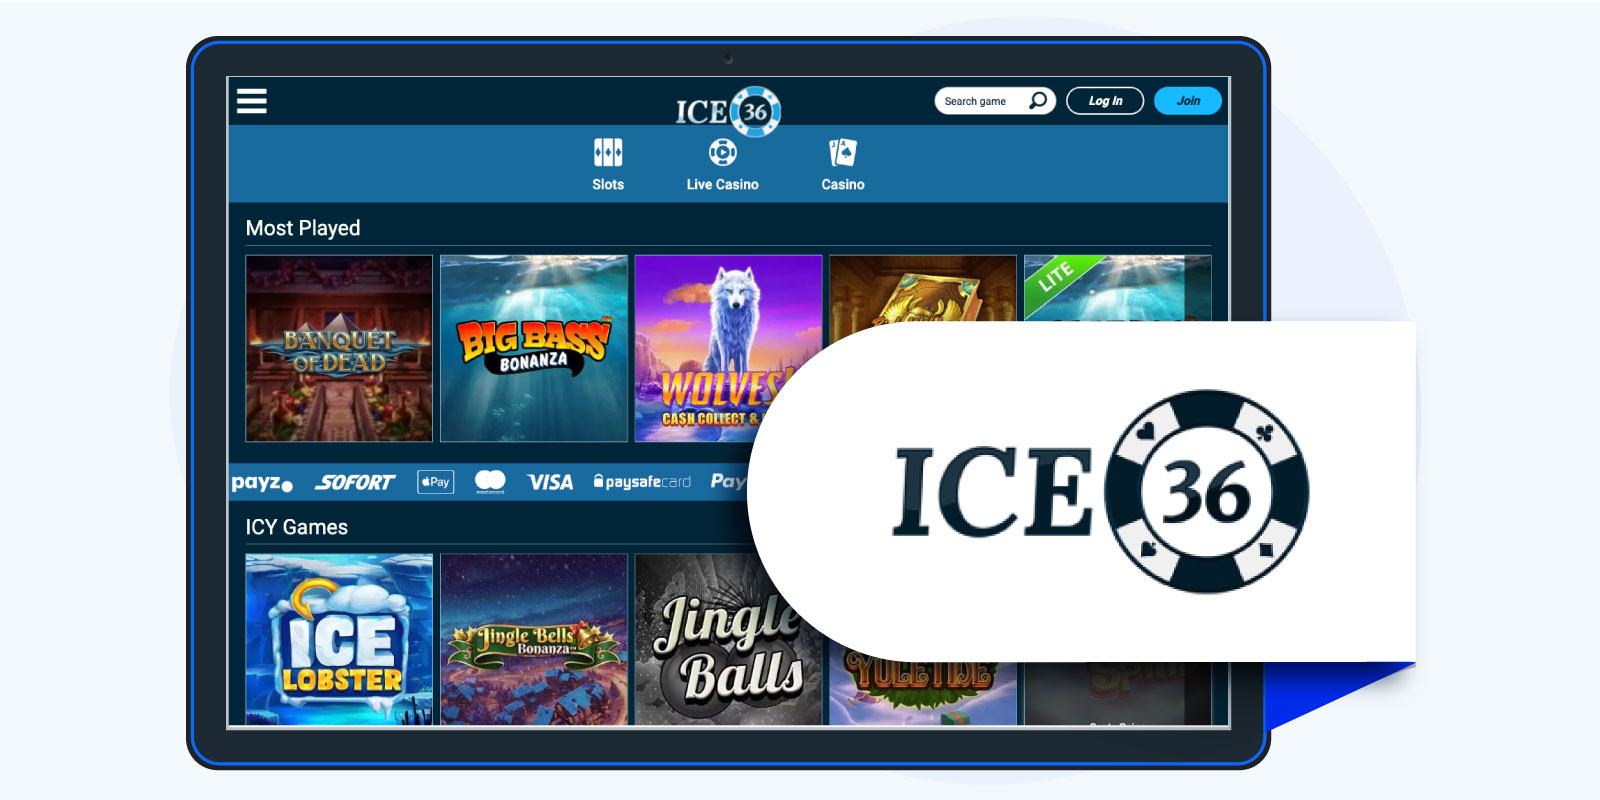 Ice36 - Best Online Casino for Customer Support in New Zealand